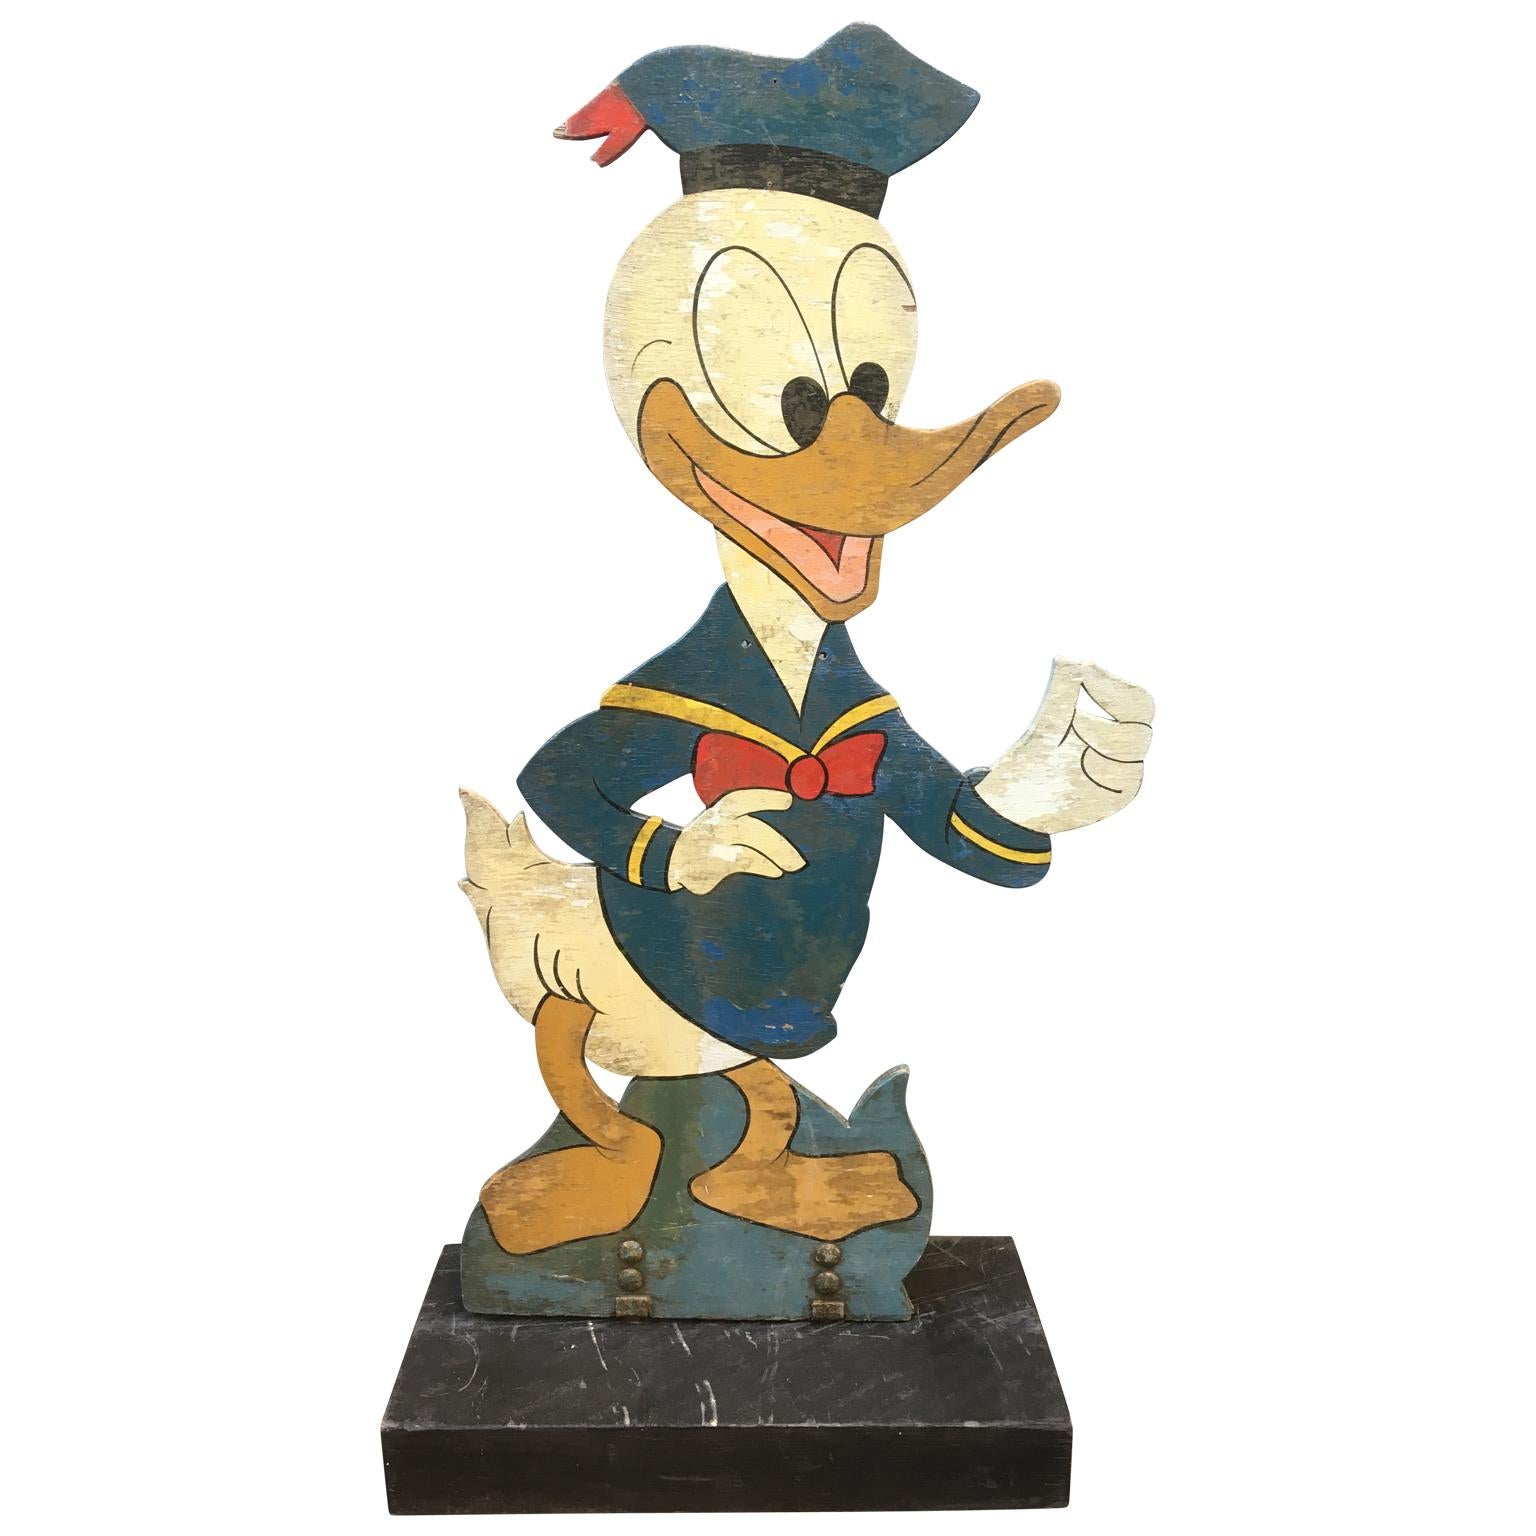 Four large wooden midcentury Disney figures Donald, Daisy, Micky Mouse And Pinocchio

Set of four amazing kids-size vintage wooden Disney figures of Donald and Daisy Duck, Micky Mouse and Pinocchio. Each figure is on black painted wooden base (50 cm